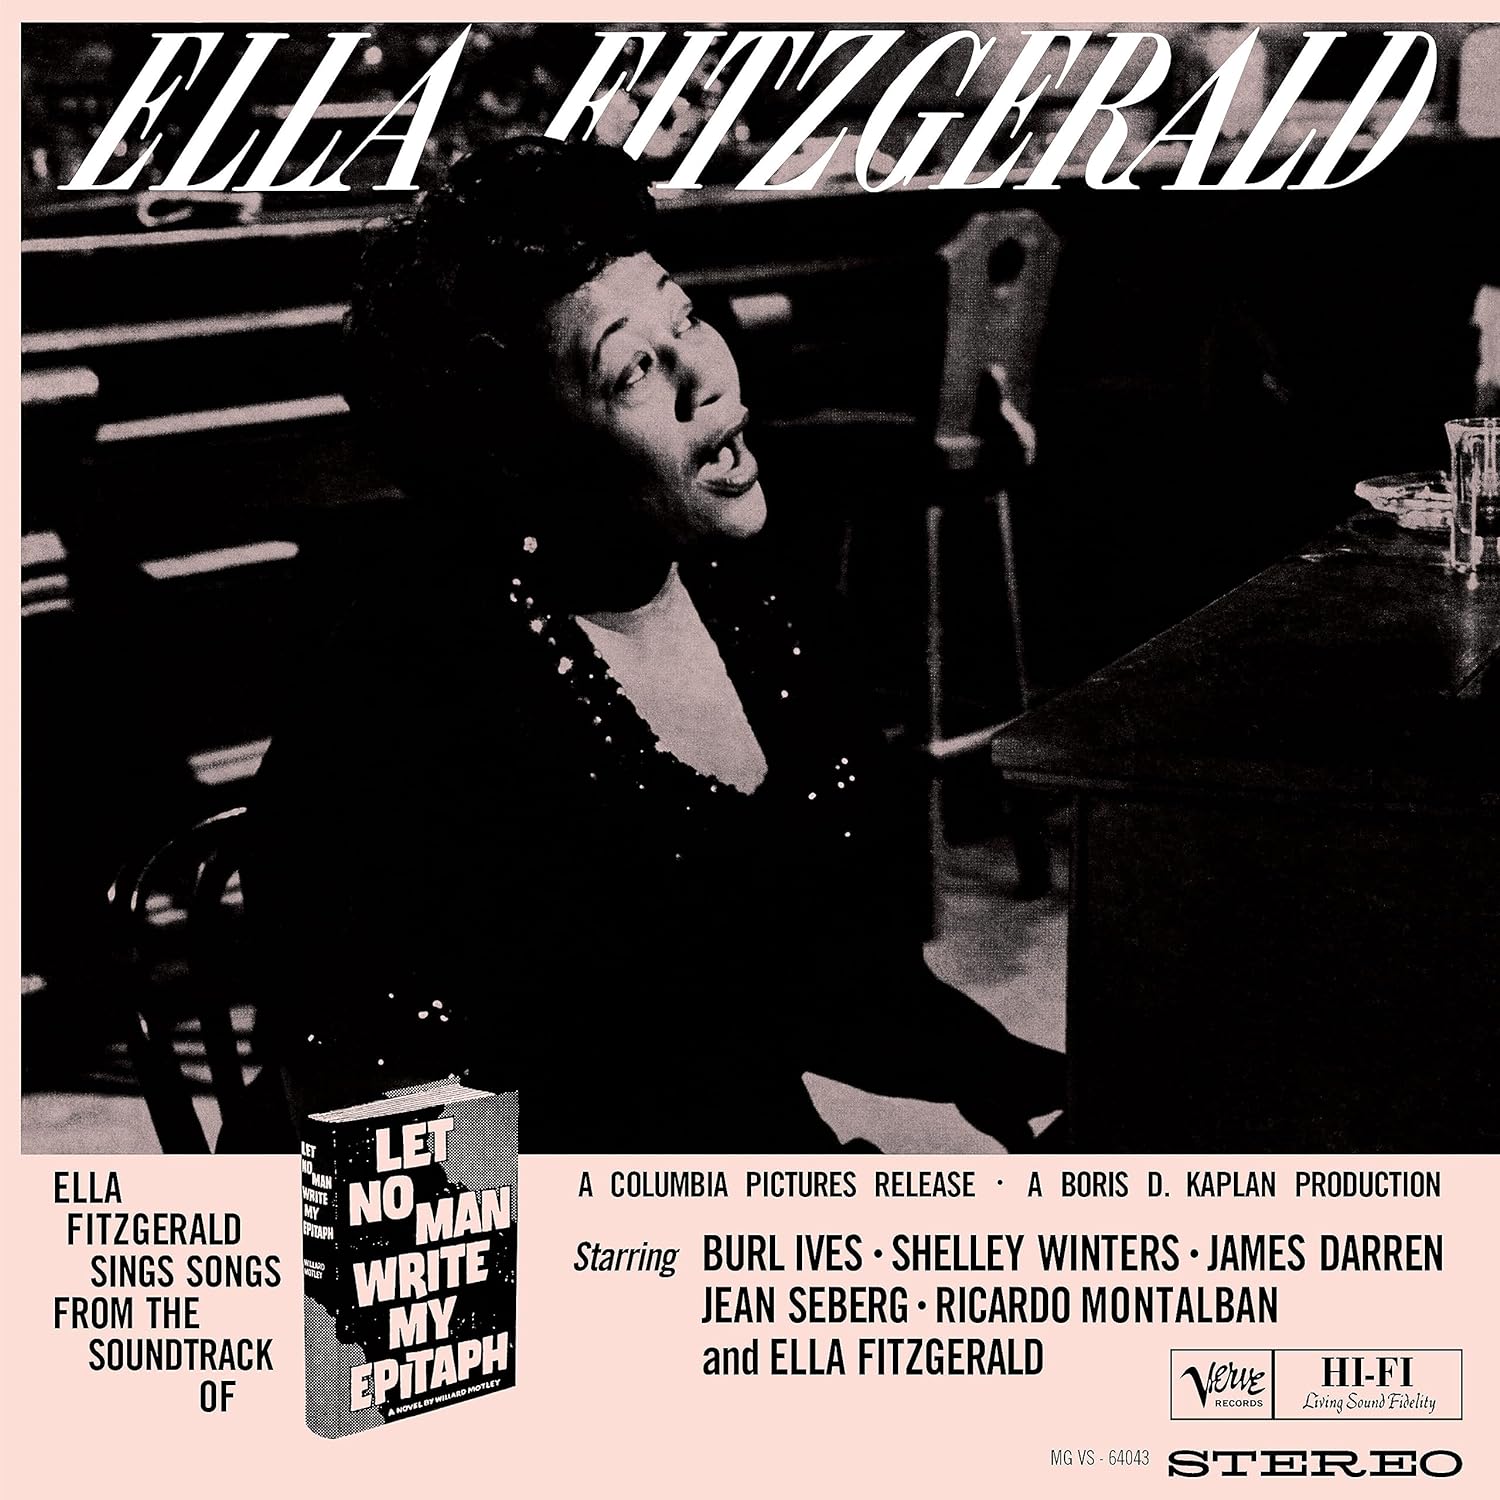 Джаз Universal US Ella Fitzgerald - Let No Man Write My Epitaph (Acoustic Sounds) (Black Vinyl LP) электроника universal ger enigma seven lives many faces limited black